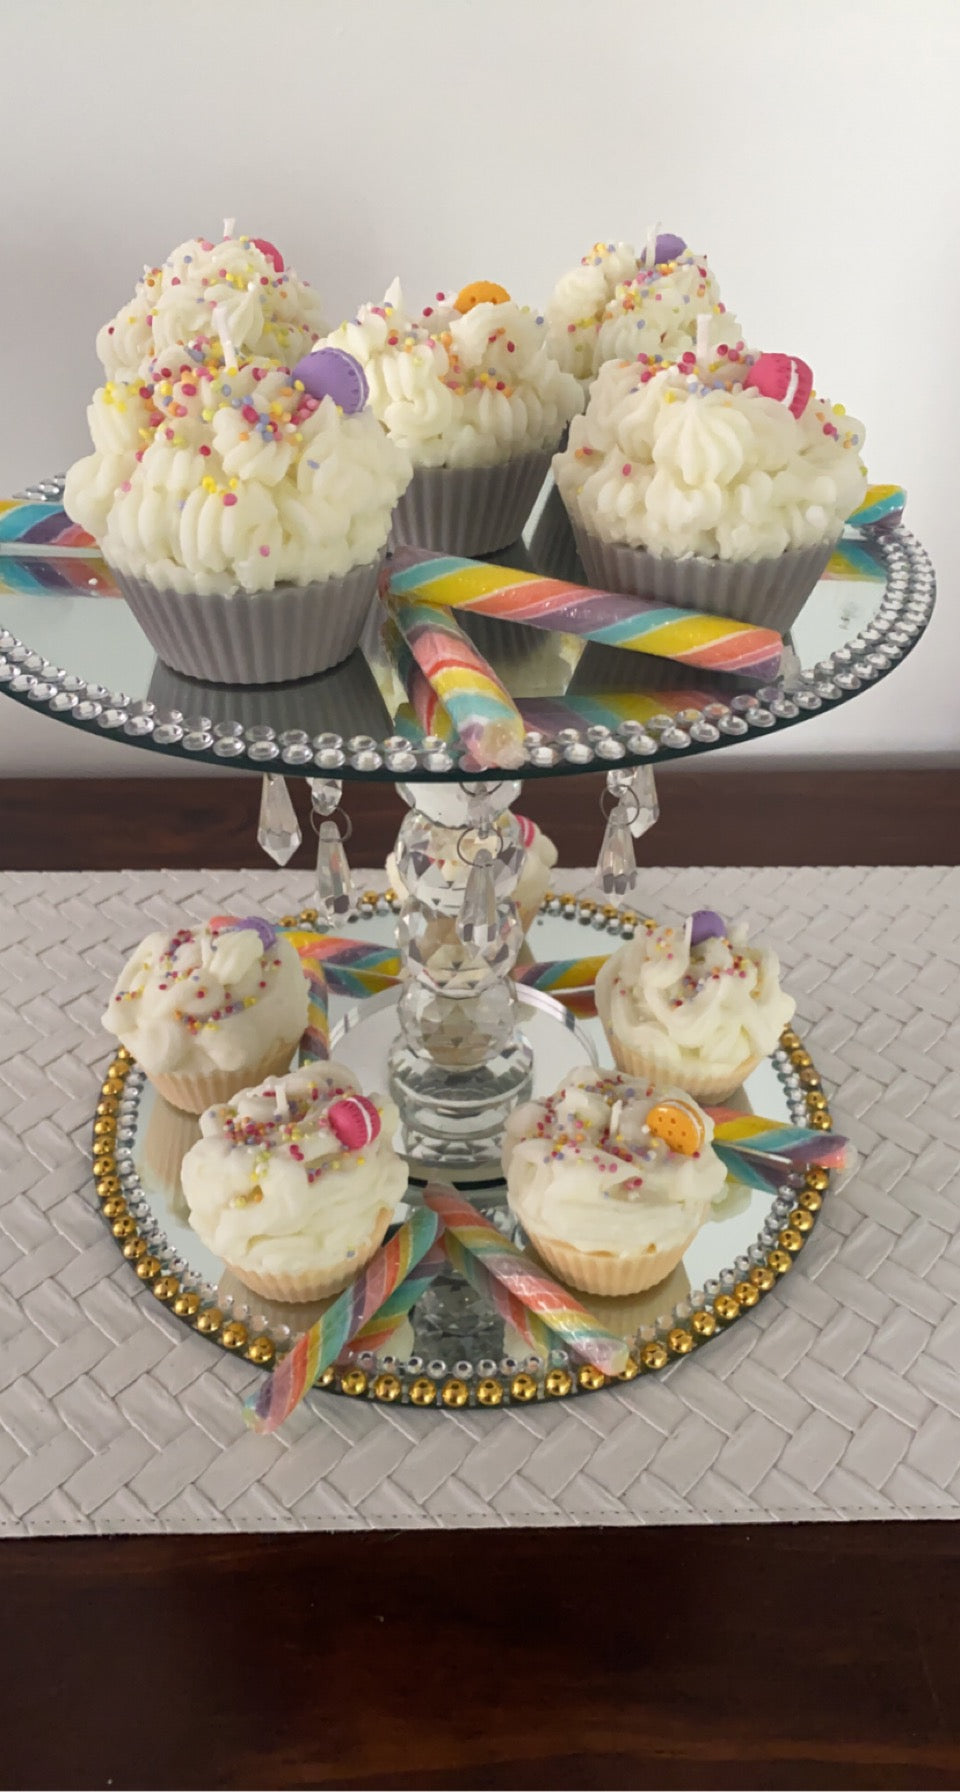 Cupcake candles Vanilla dream or Buttered caramel popcorn Gift boxed